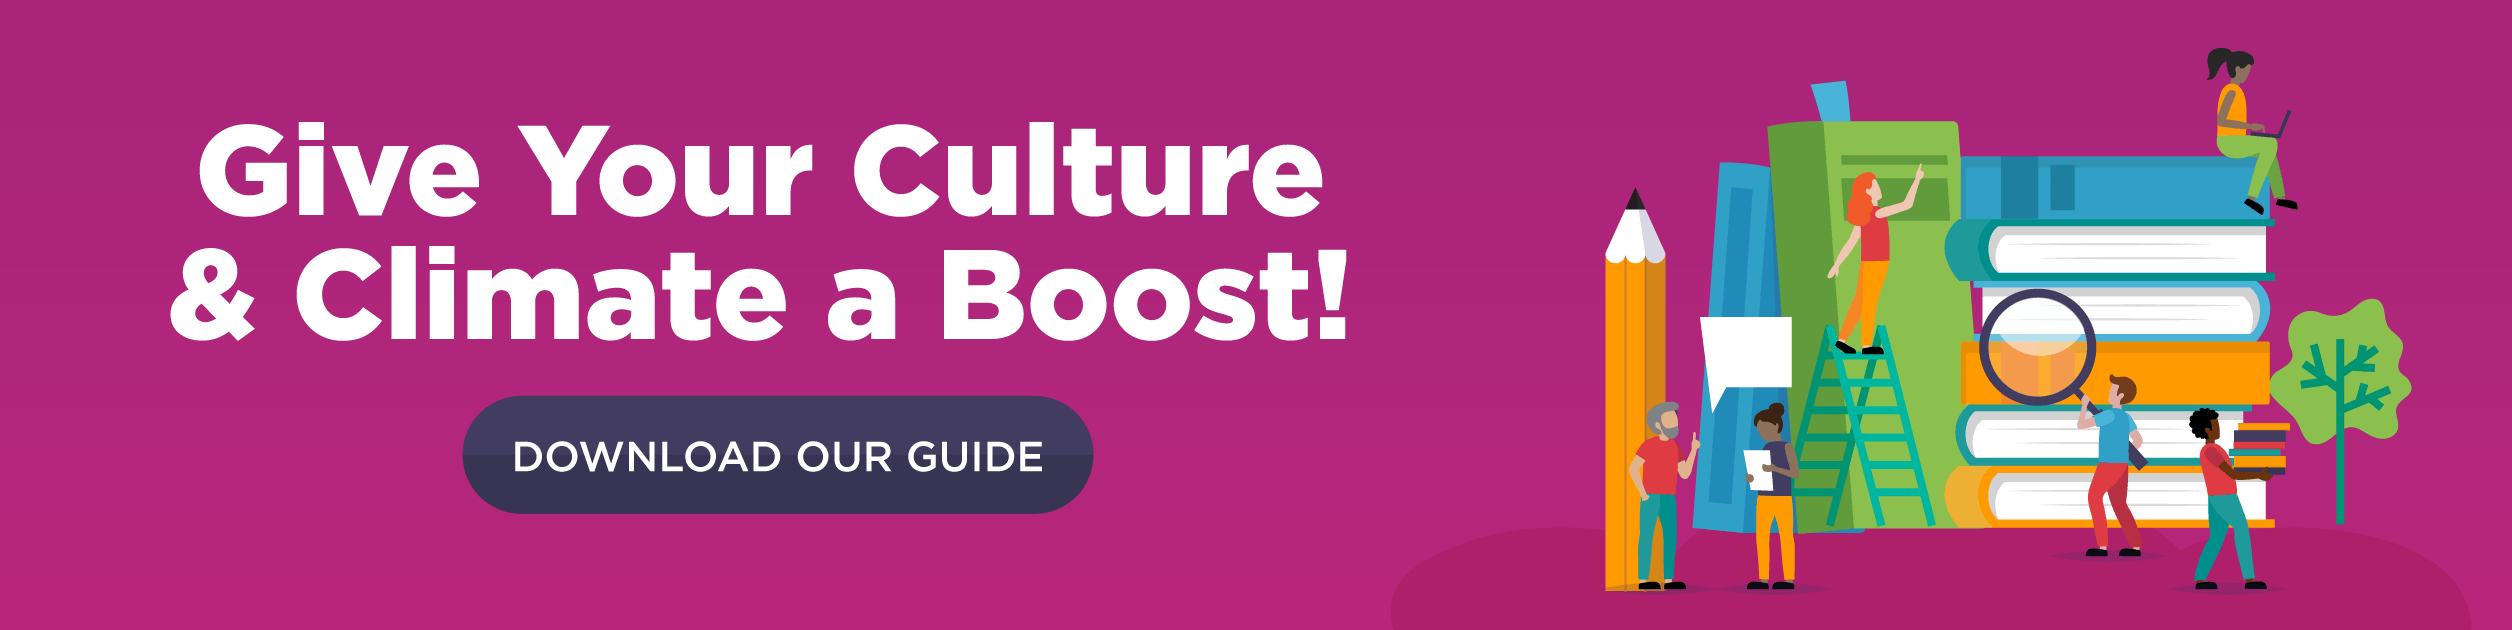 Give Your Culture & Climate a Boost! Download our guide.